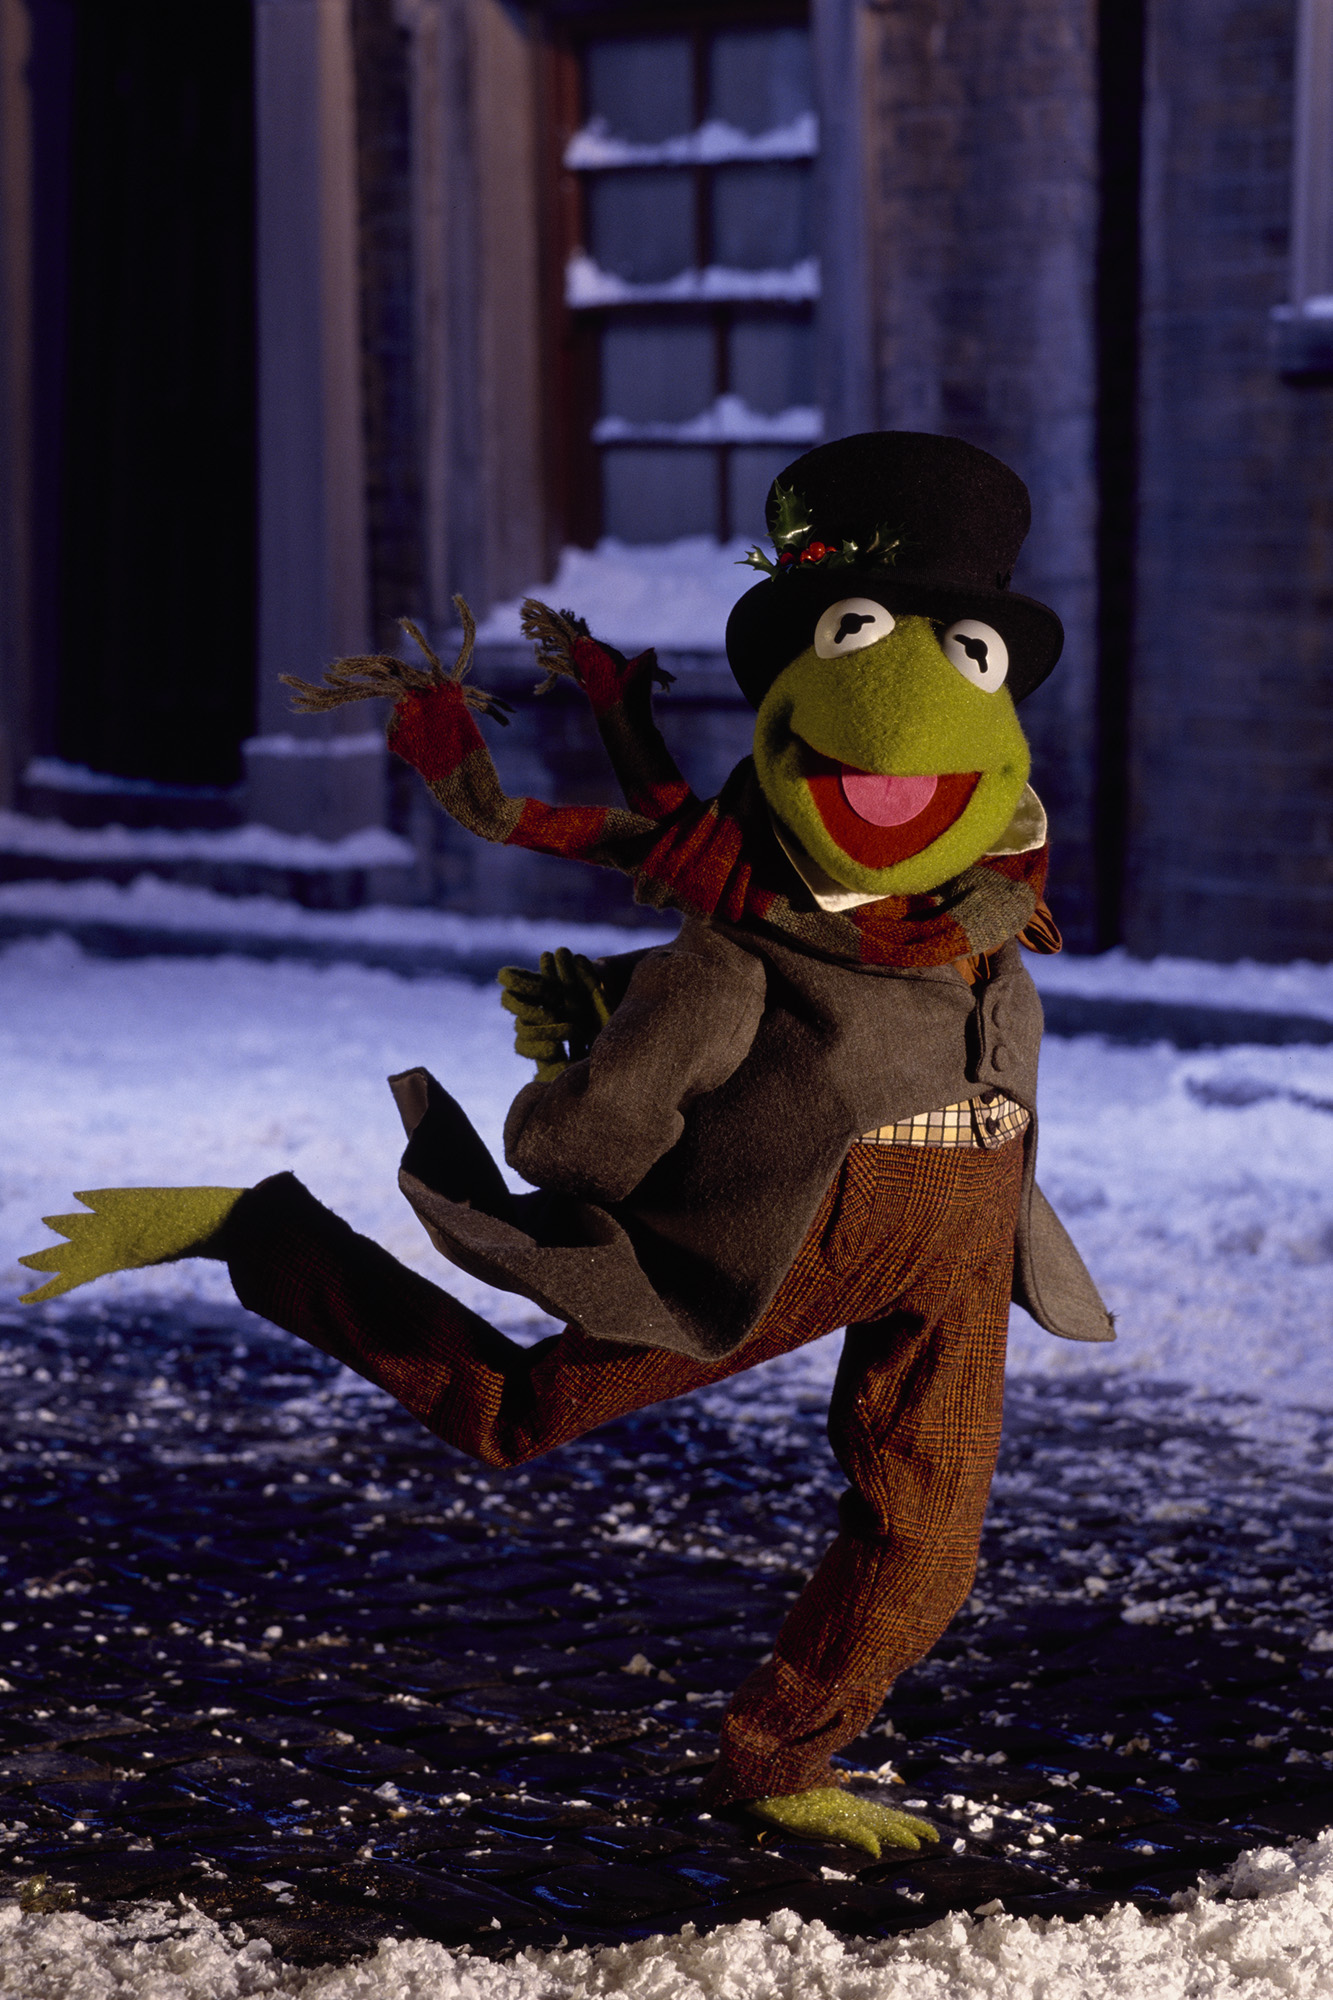 Songwriter Paul Williams on the inspirations for his tunes in The Muppet Christmas Carol